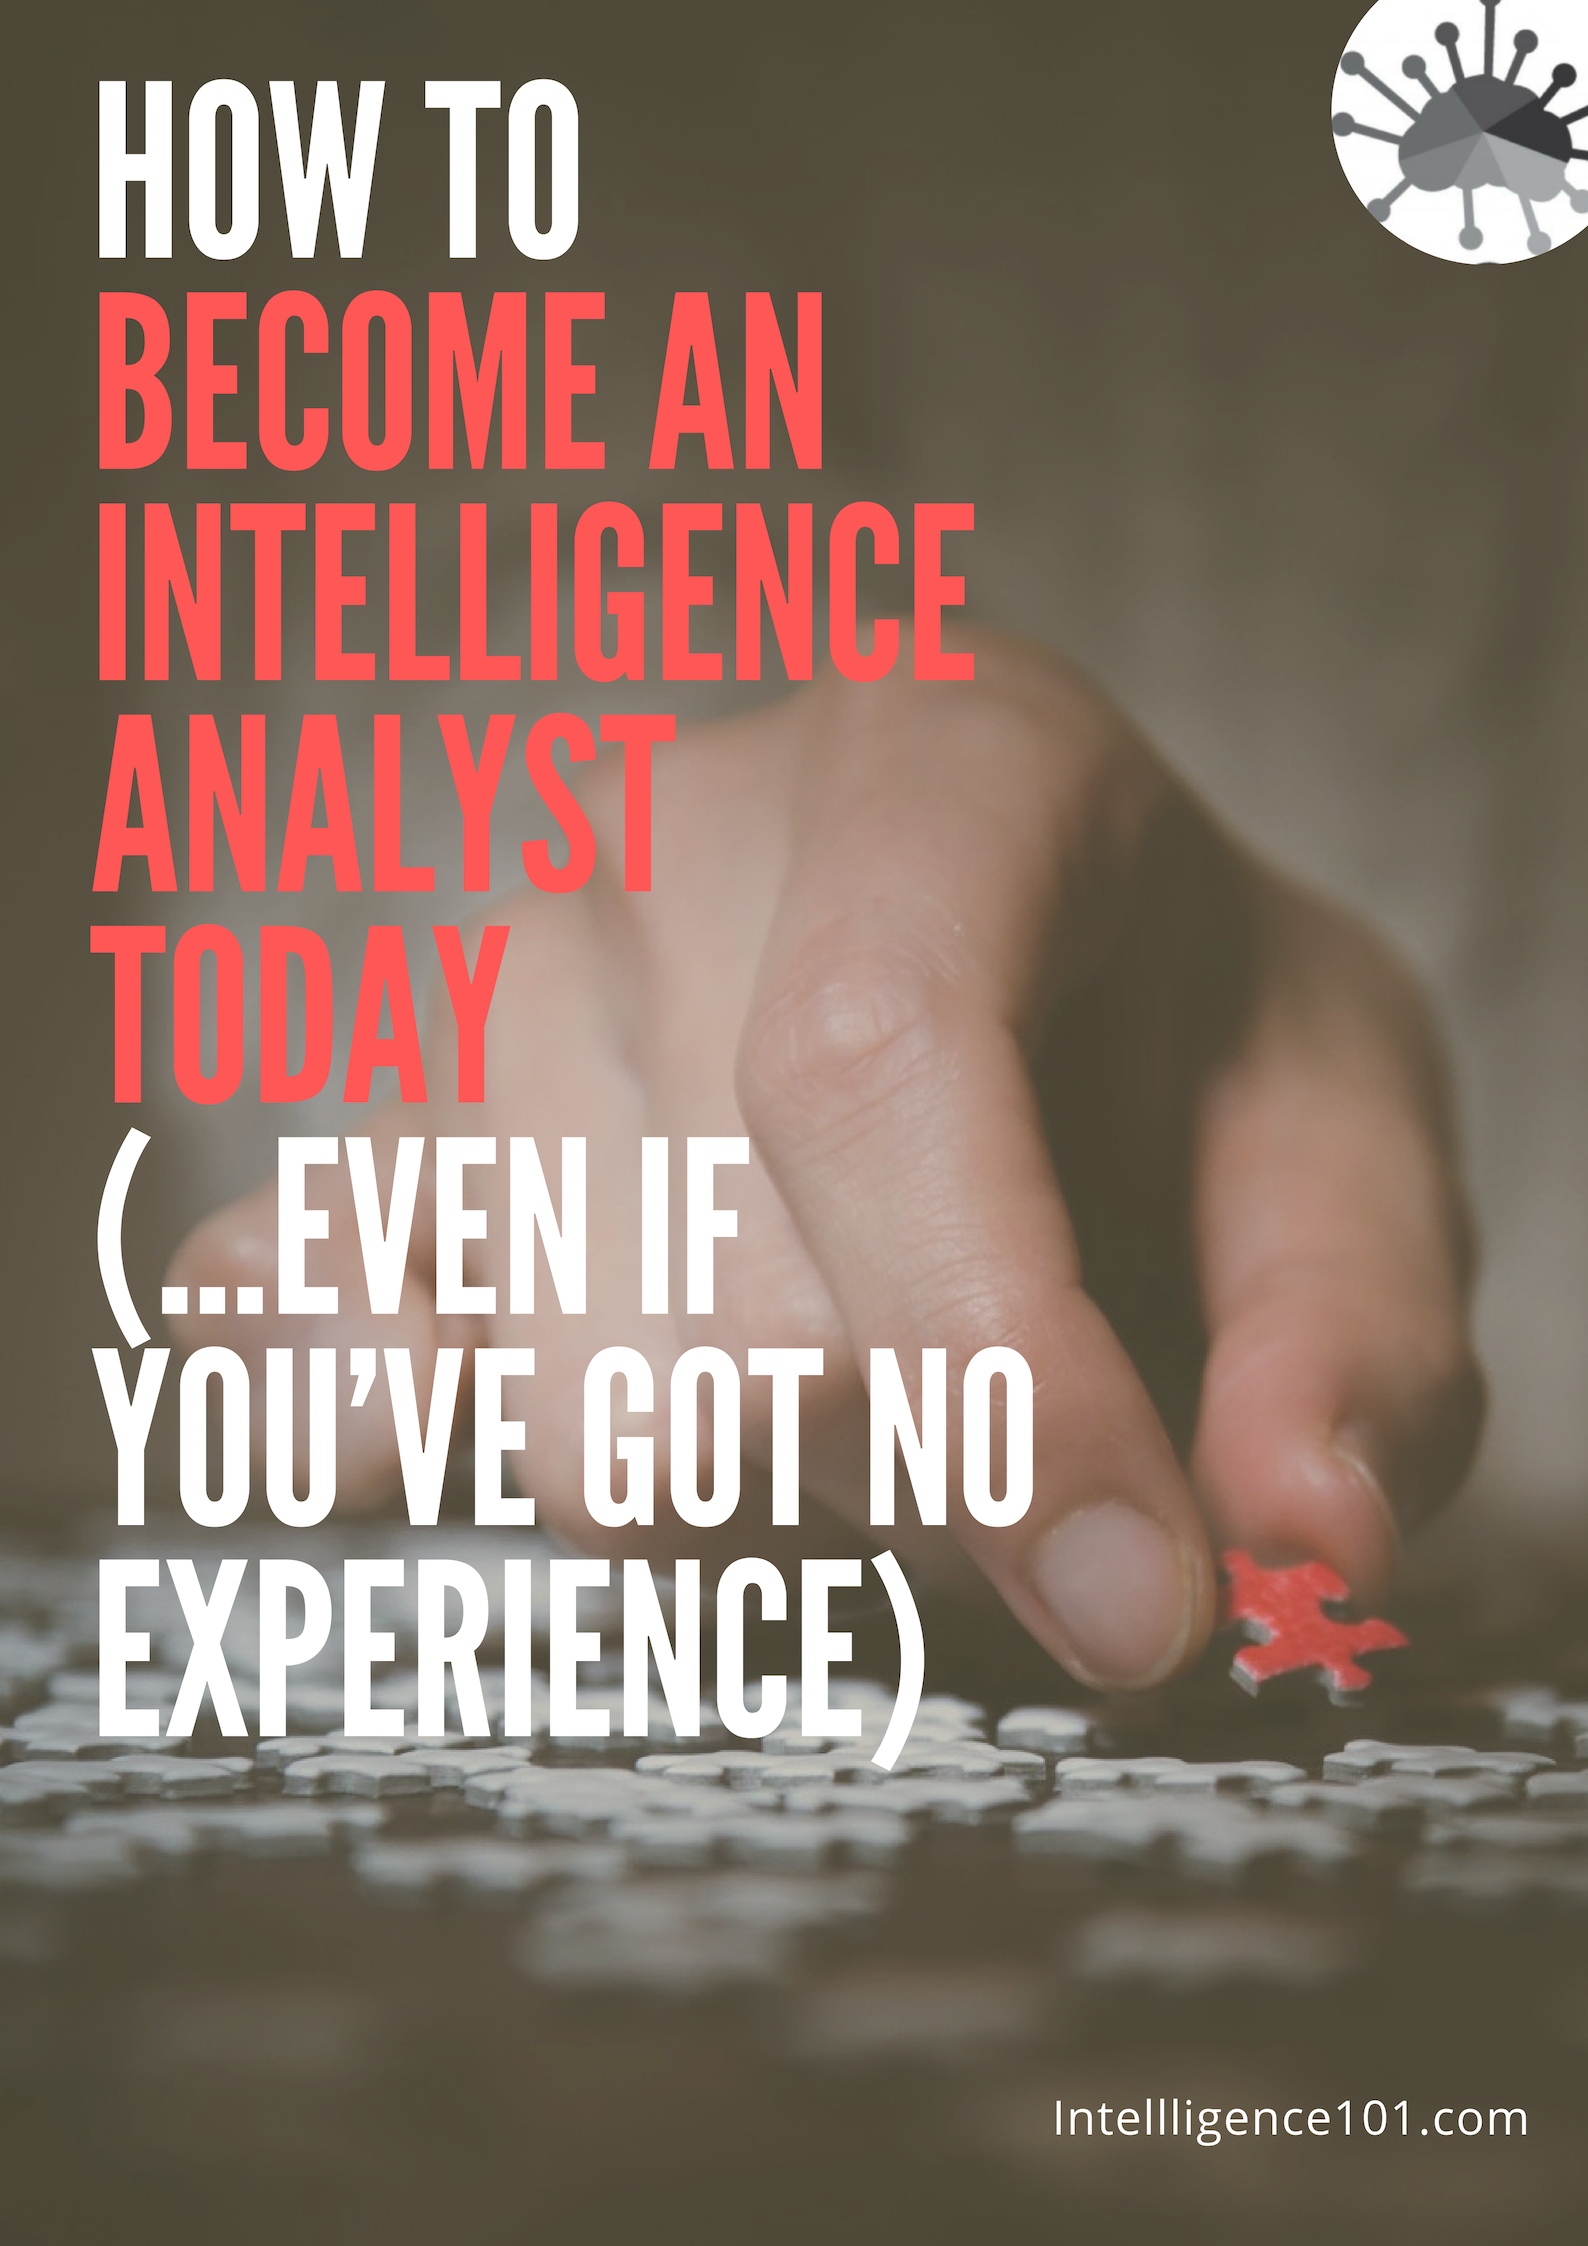 How to Become an Intelligence Analyst Today (...even if you’ve got no experience)